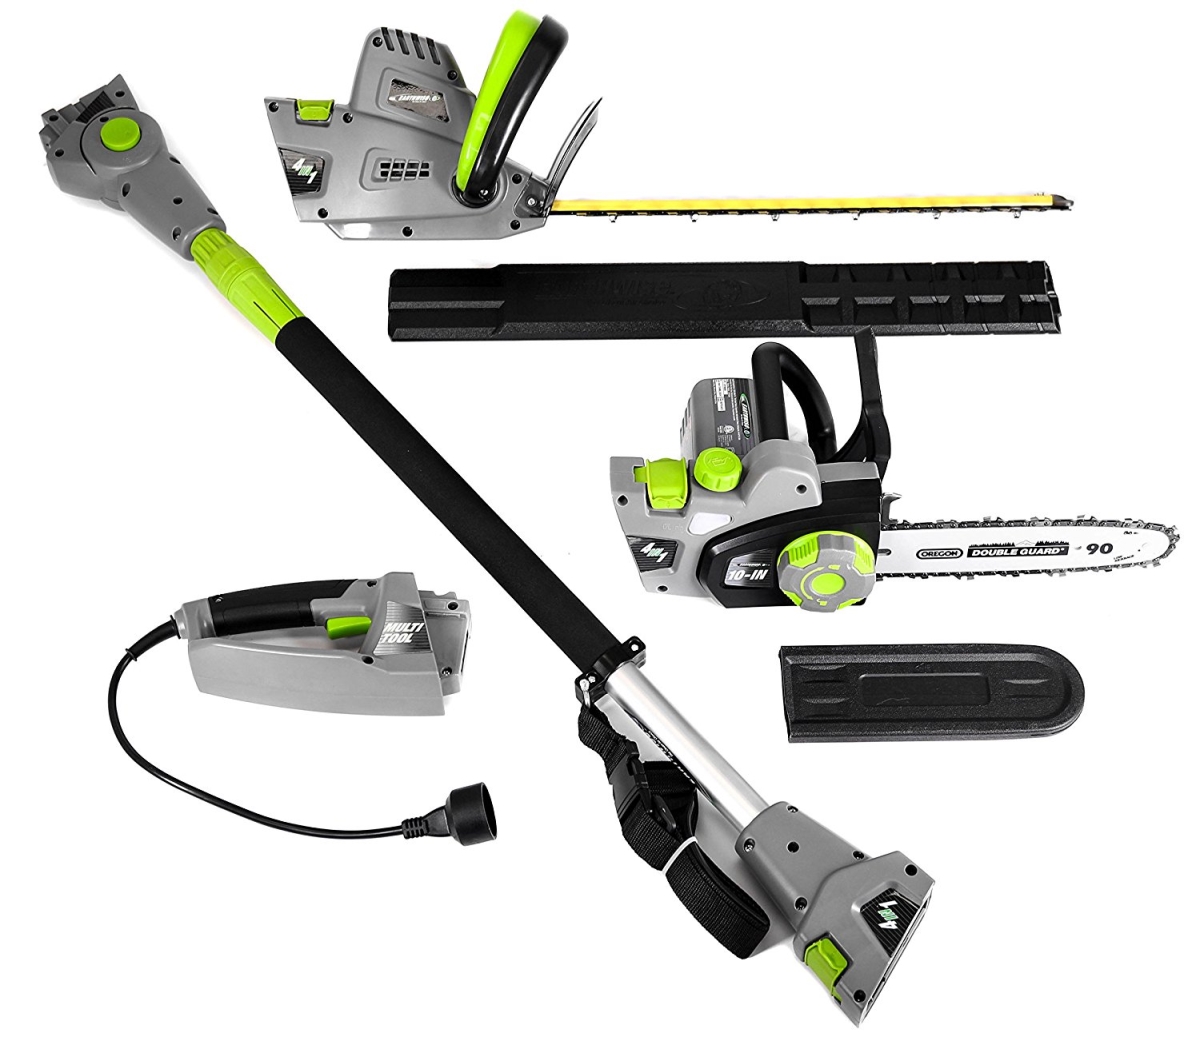 Cvp41810 4-in-1 Multi-tool Pole With Handheld Hedge Trimmer Pole & Handheld Chain Saw